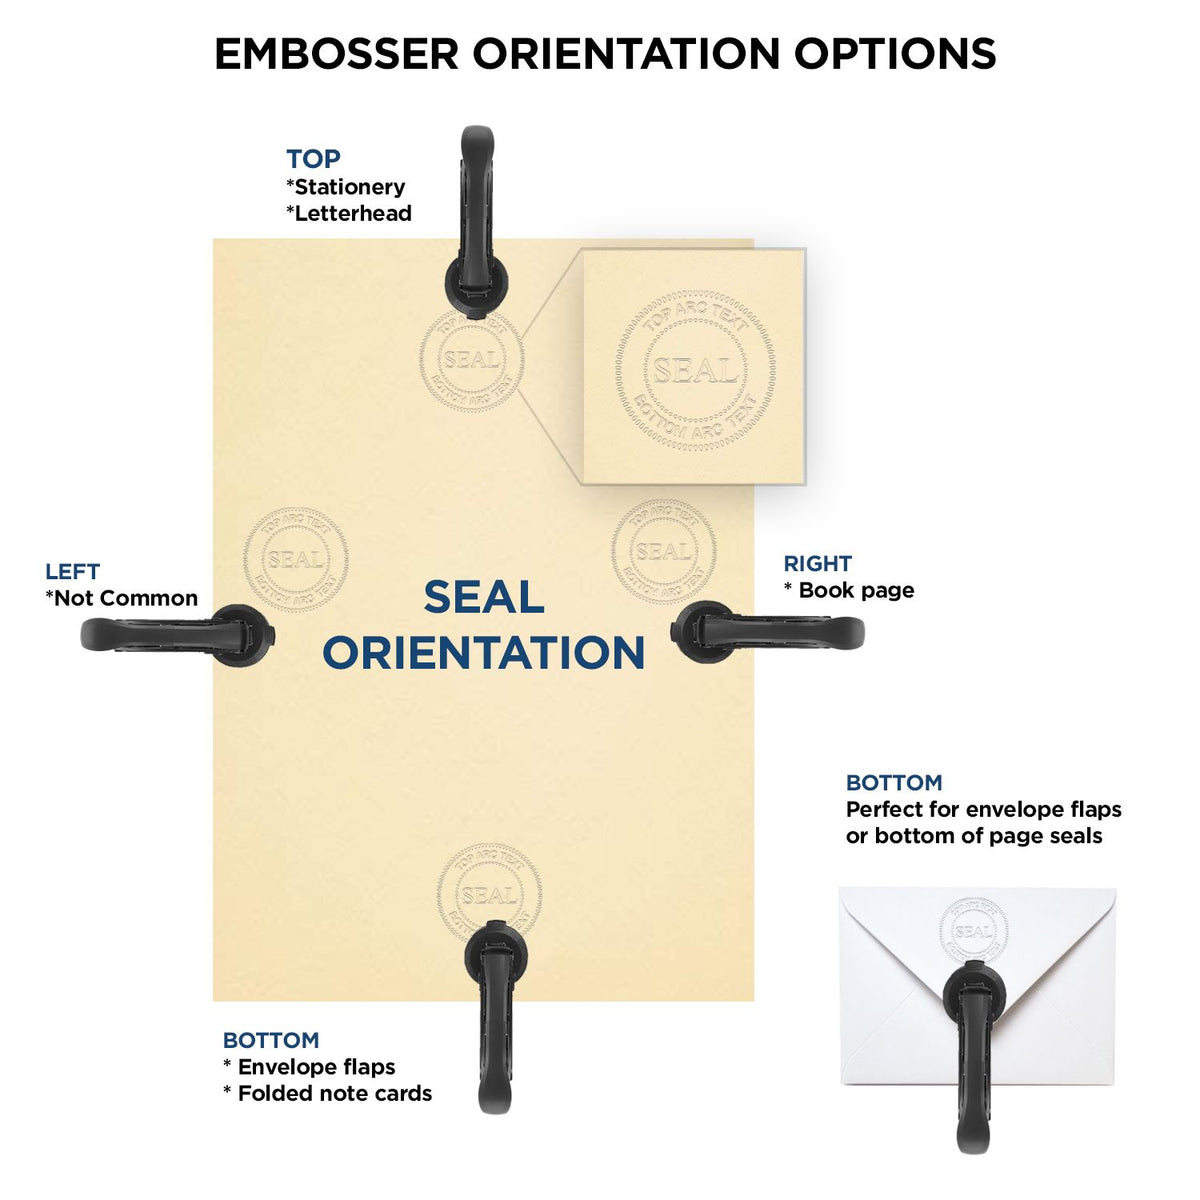 An infographic for the Long Reach New Jersey PE Seal showing embosser orientation, this is showing examples of a top, bottom, right and left insert.